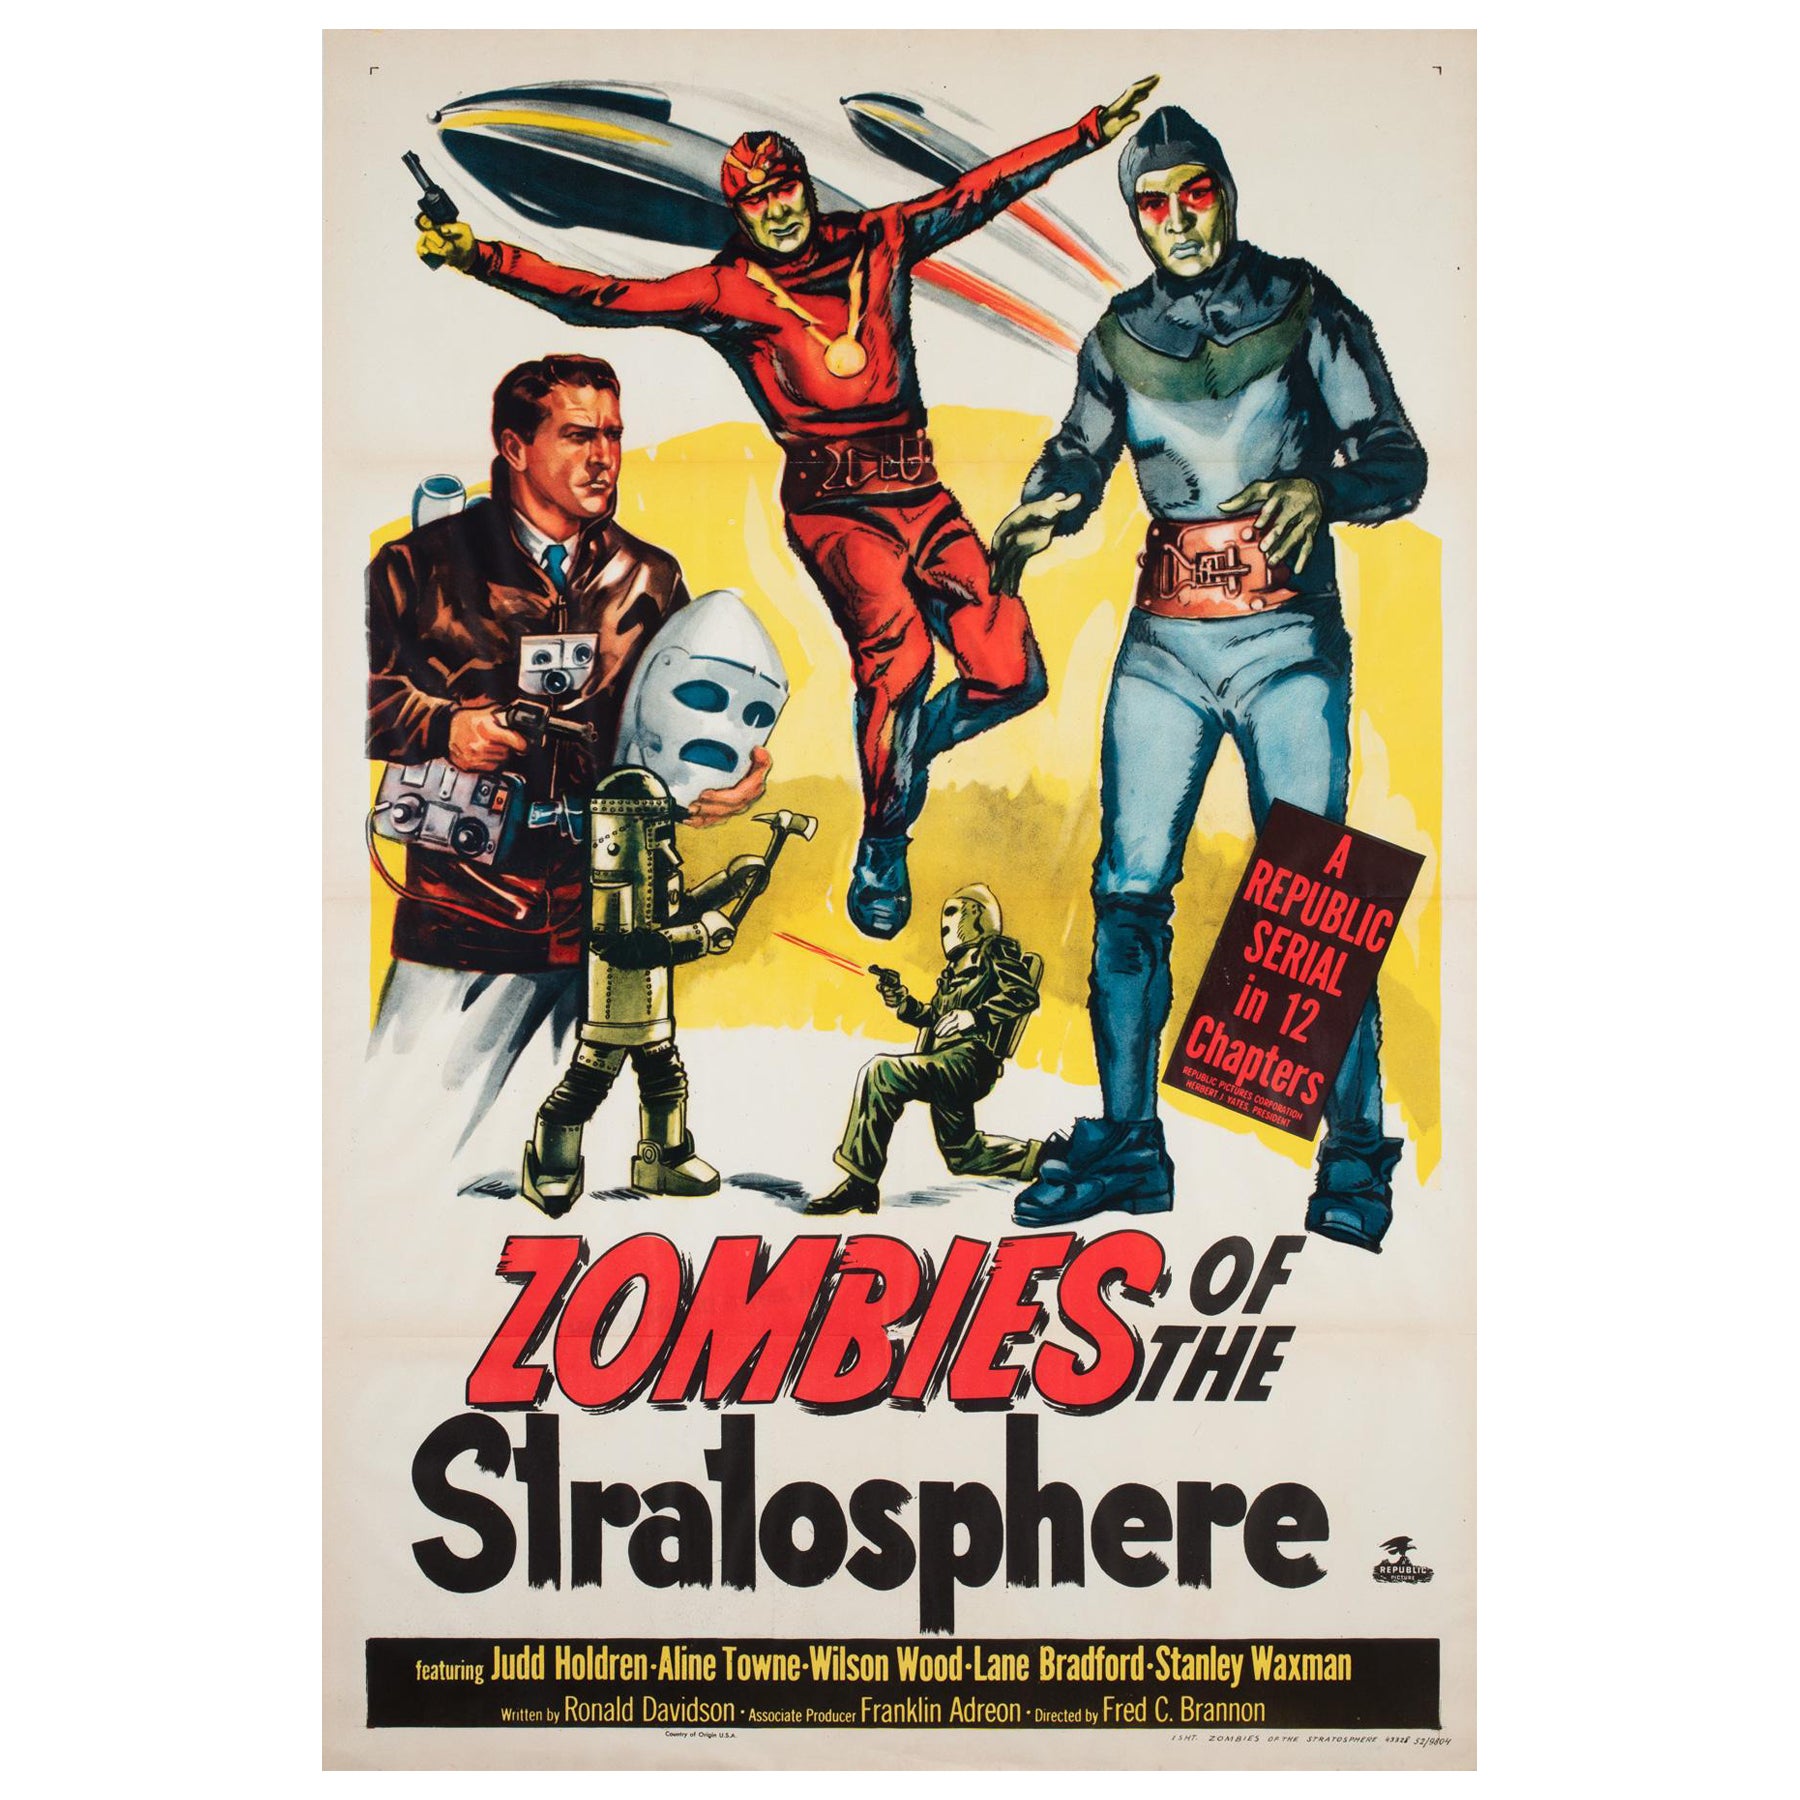 „Zombies of the Stratosphere“, US-Filmplakat, 1952